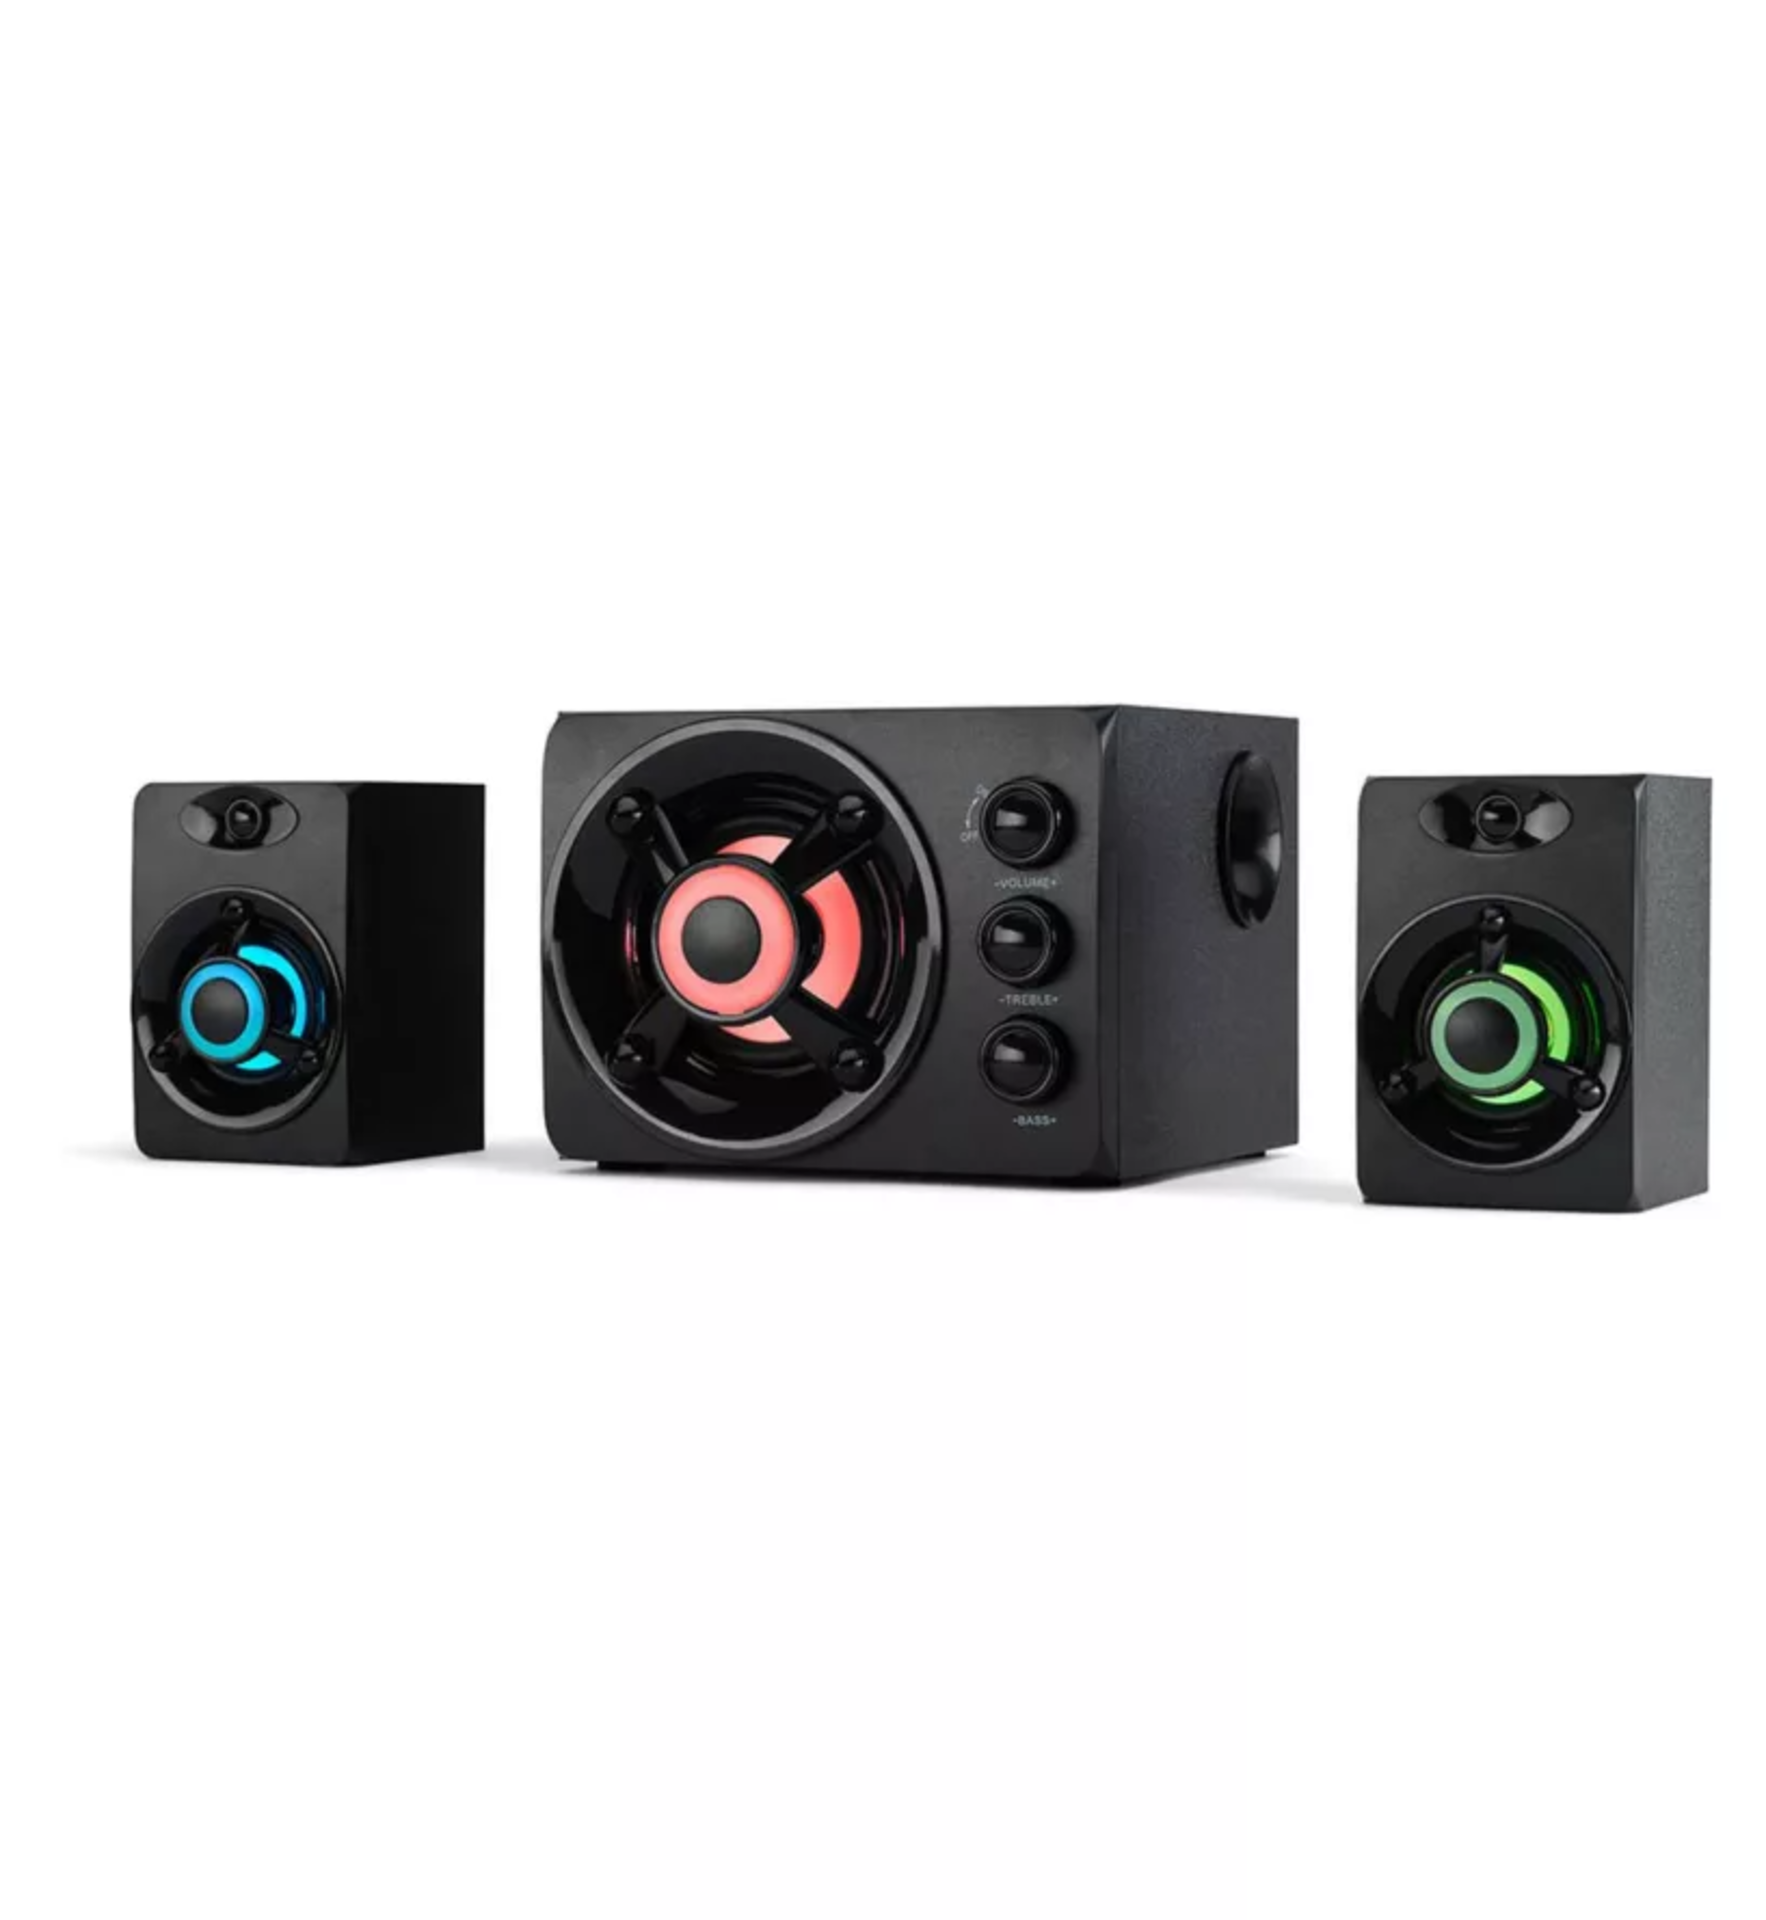 3 x RED5 Light Up Speaker Set 2.1 Gaming Set. - BW. It’s a 2:1 sound system designed for use with